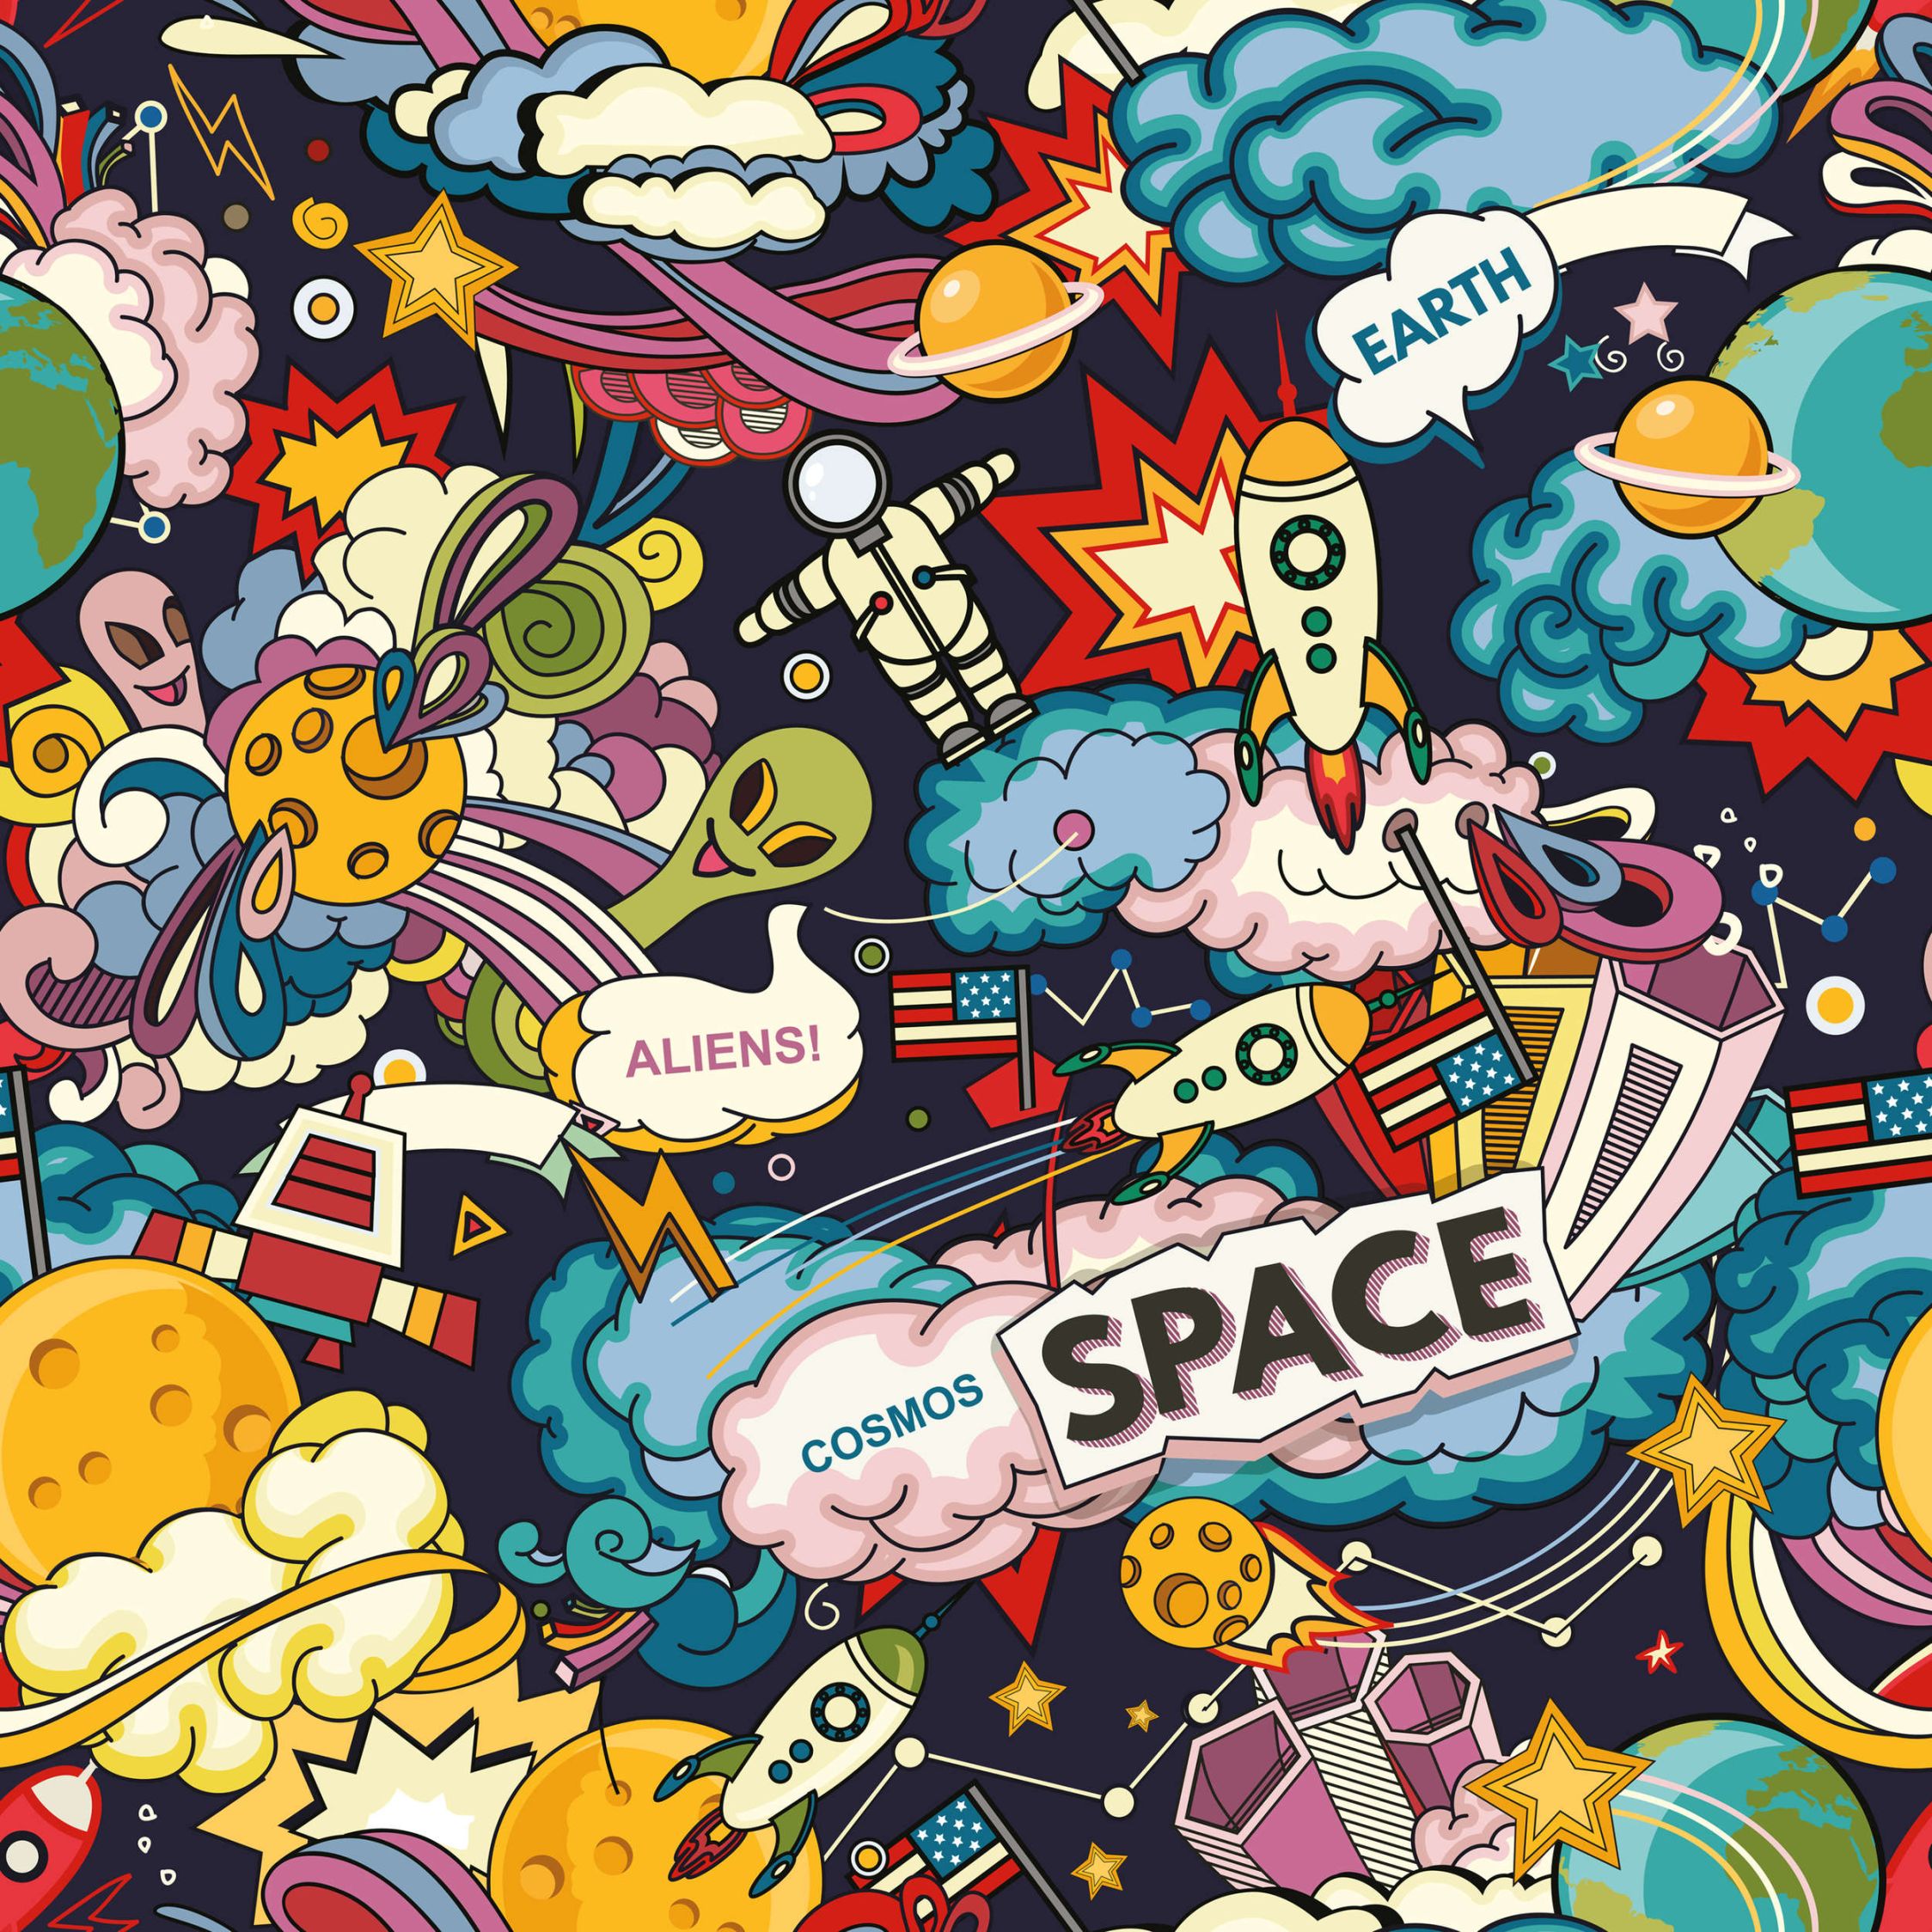             Photo wallpaper Universe collage in comic style - Smooth & slightly shiny non-woven
        